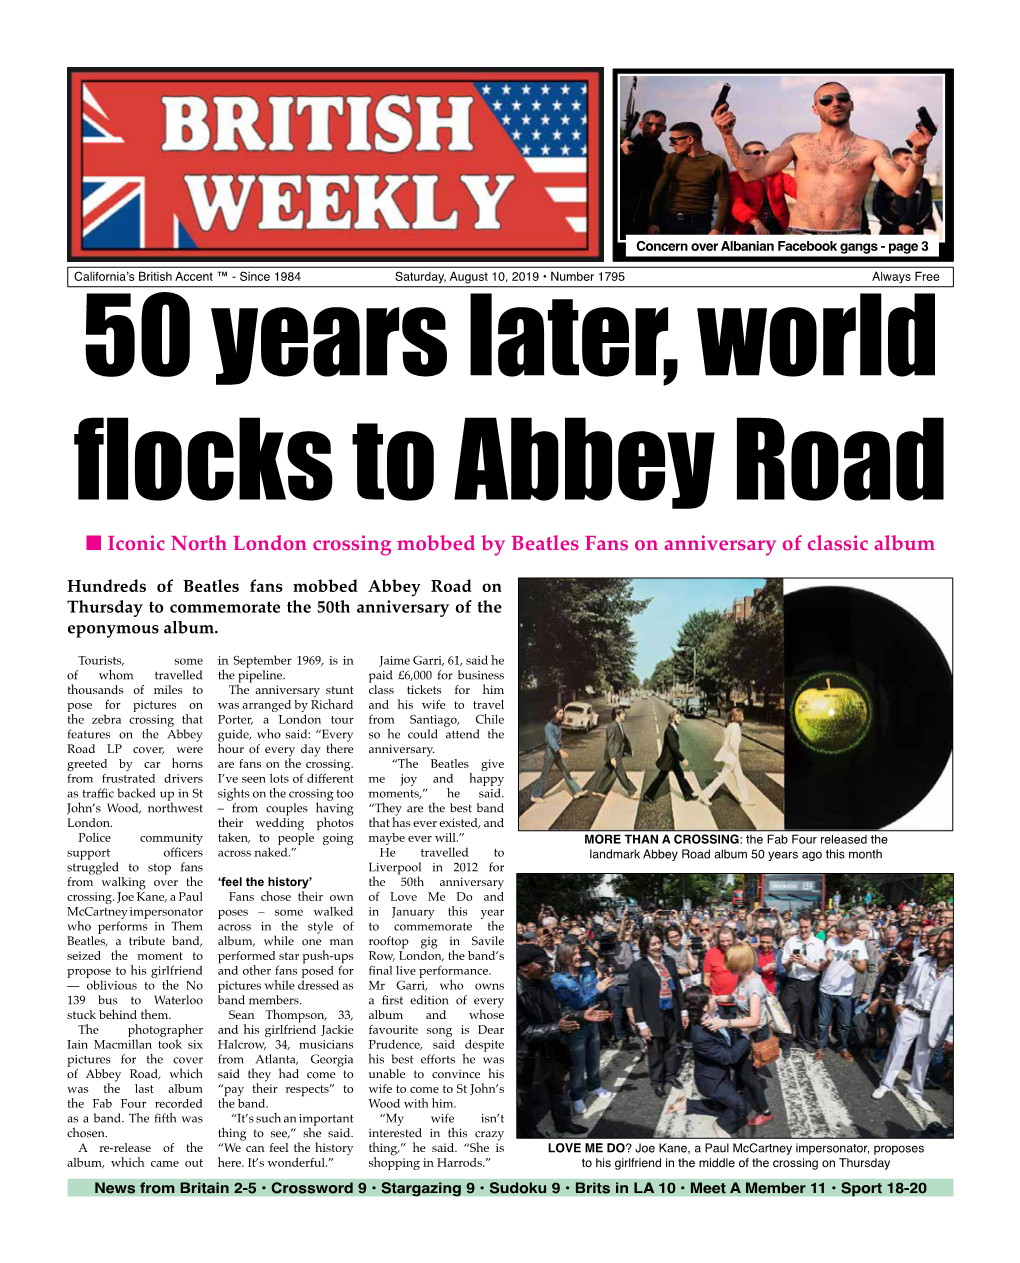 50 Years Later, World Flocks to Abbey Road N Iconic North London Crossing Mobbed by Beatles Fans on Anniversary of Classic Album